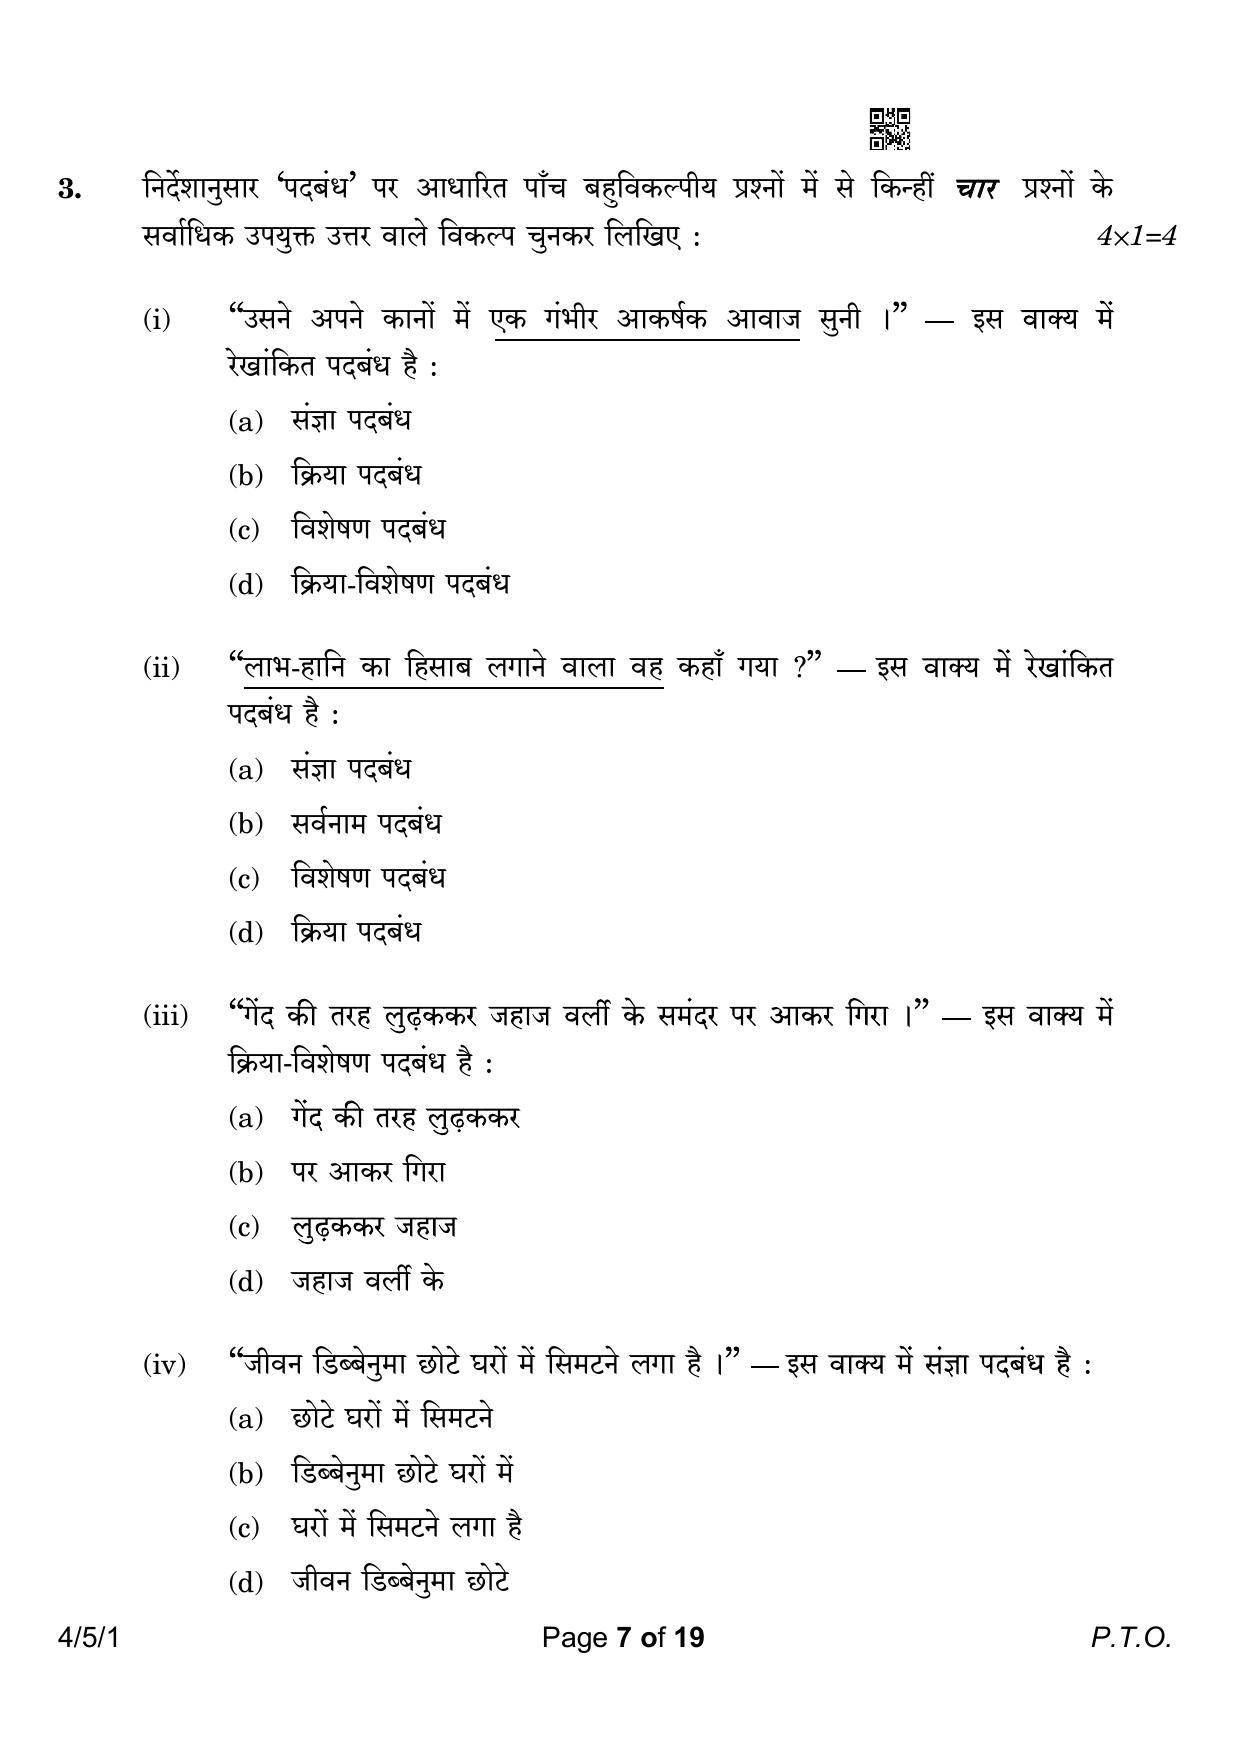 CBSE Class 10 4-5-1 Hindi B 2023 Question Paper - Page 7